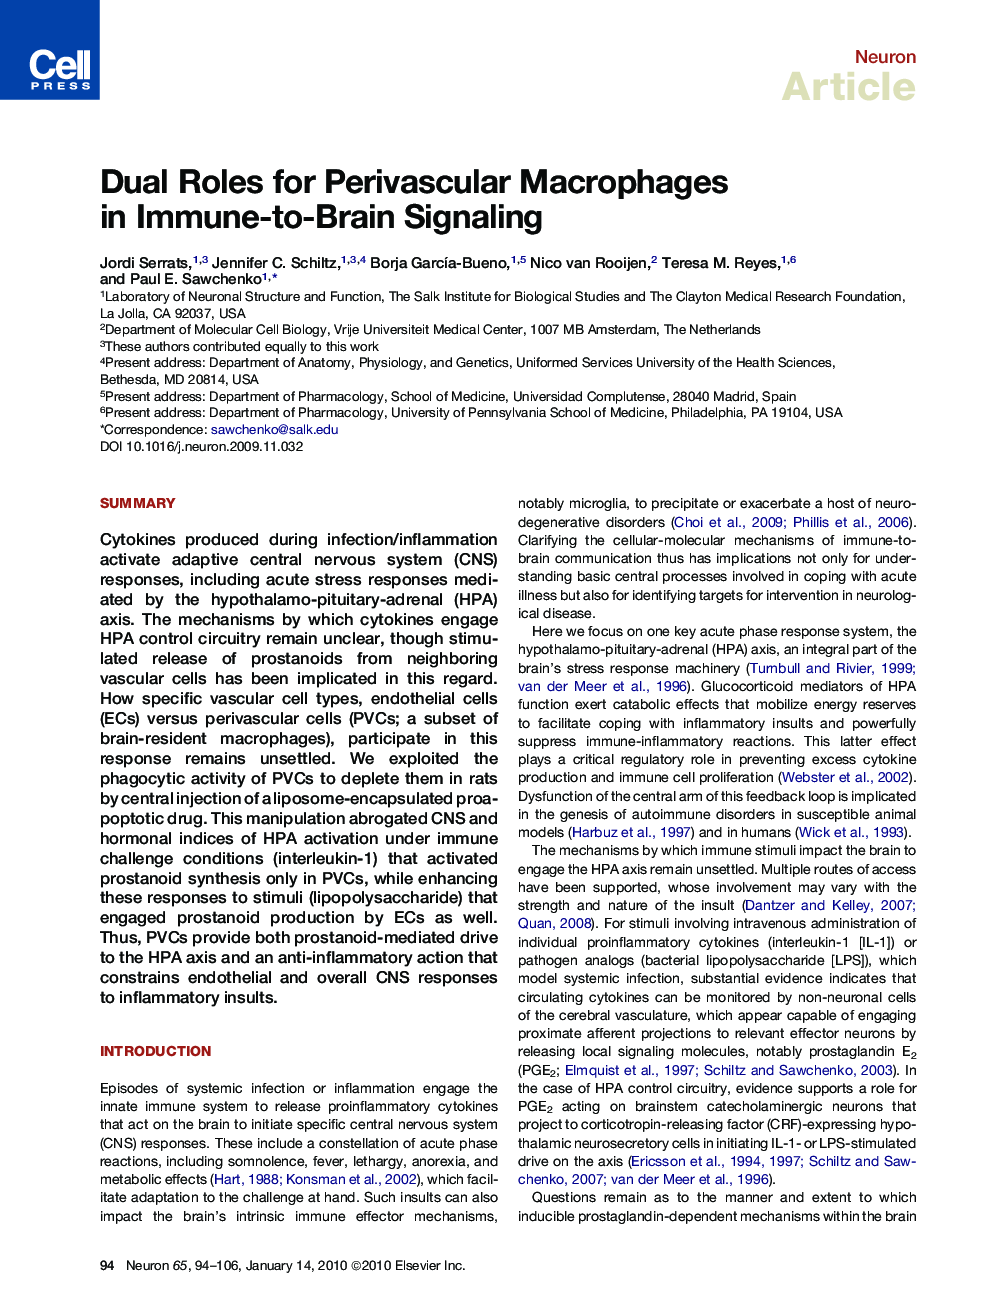 Dual Roles for Perivascular Macrophages in Immune-to-Brain Signaling